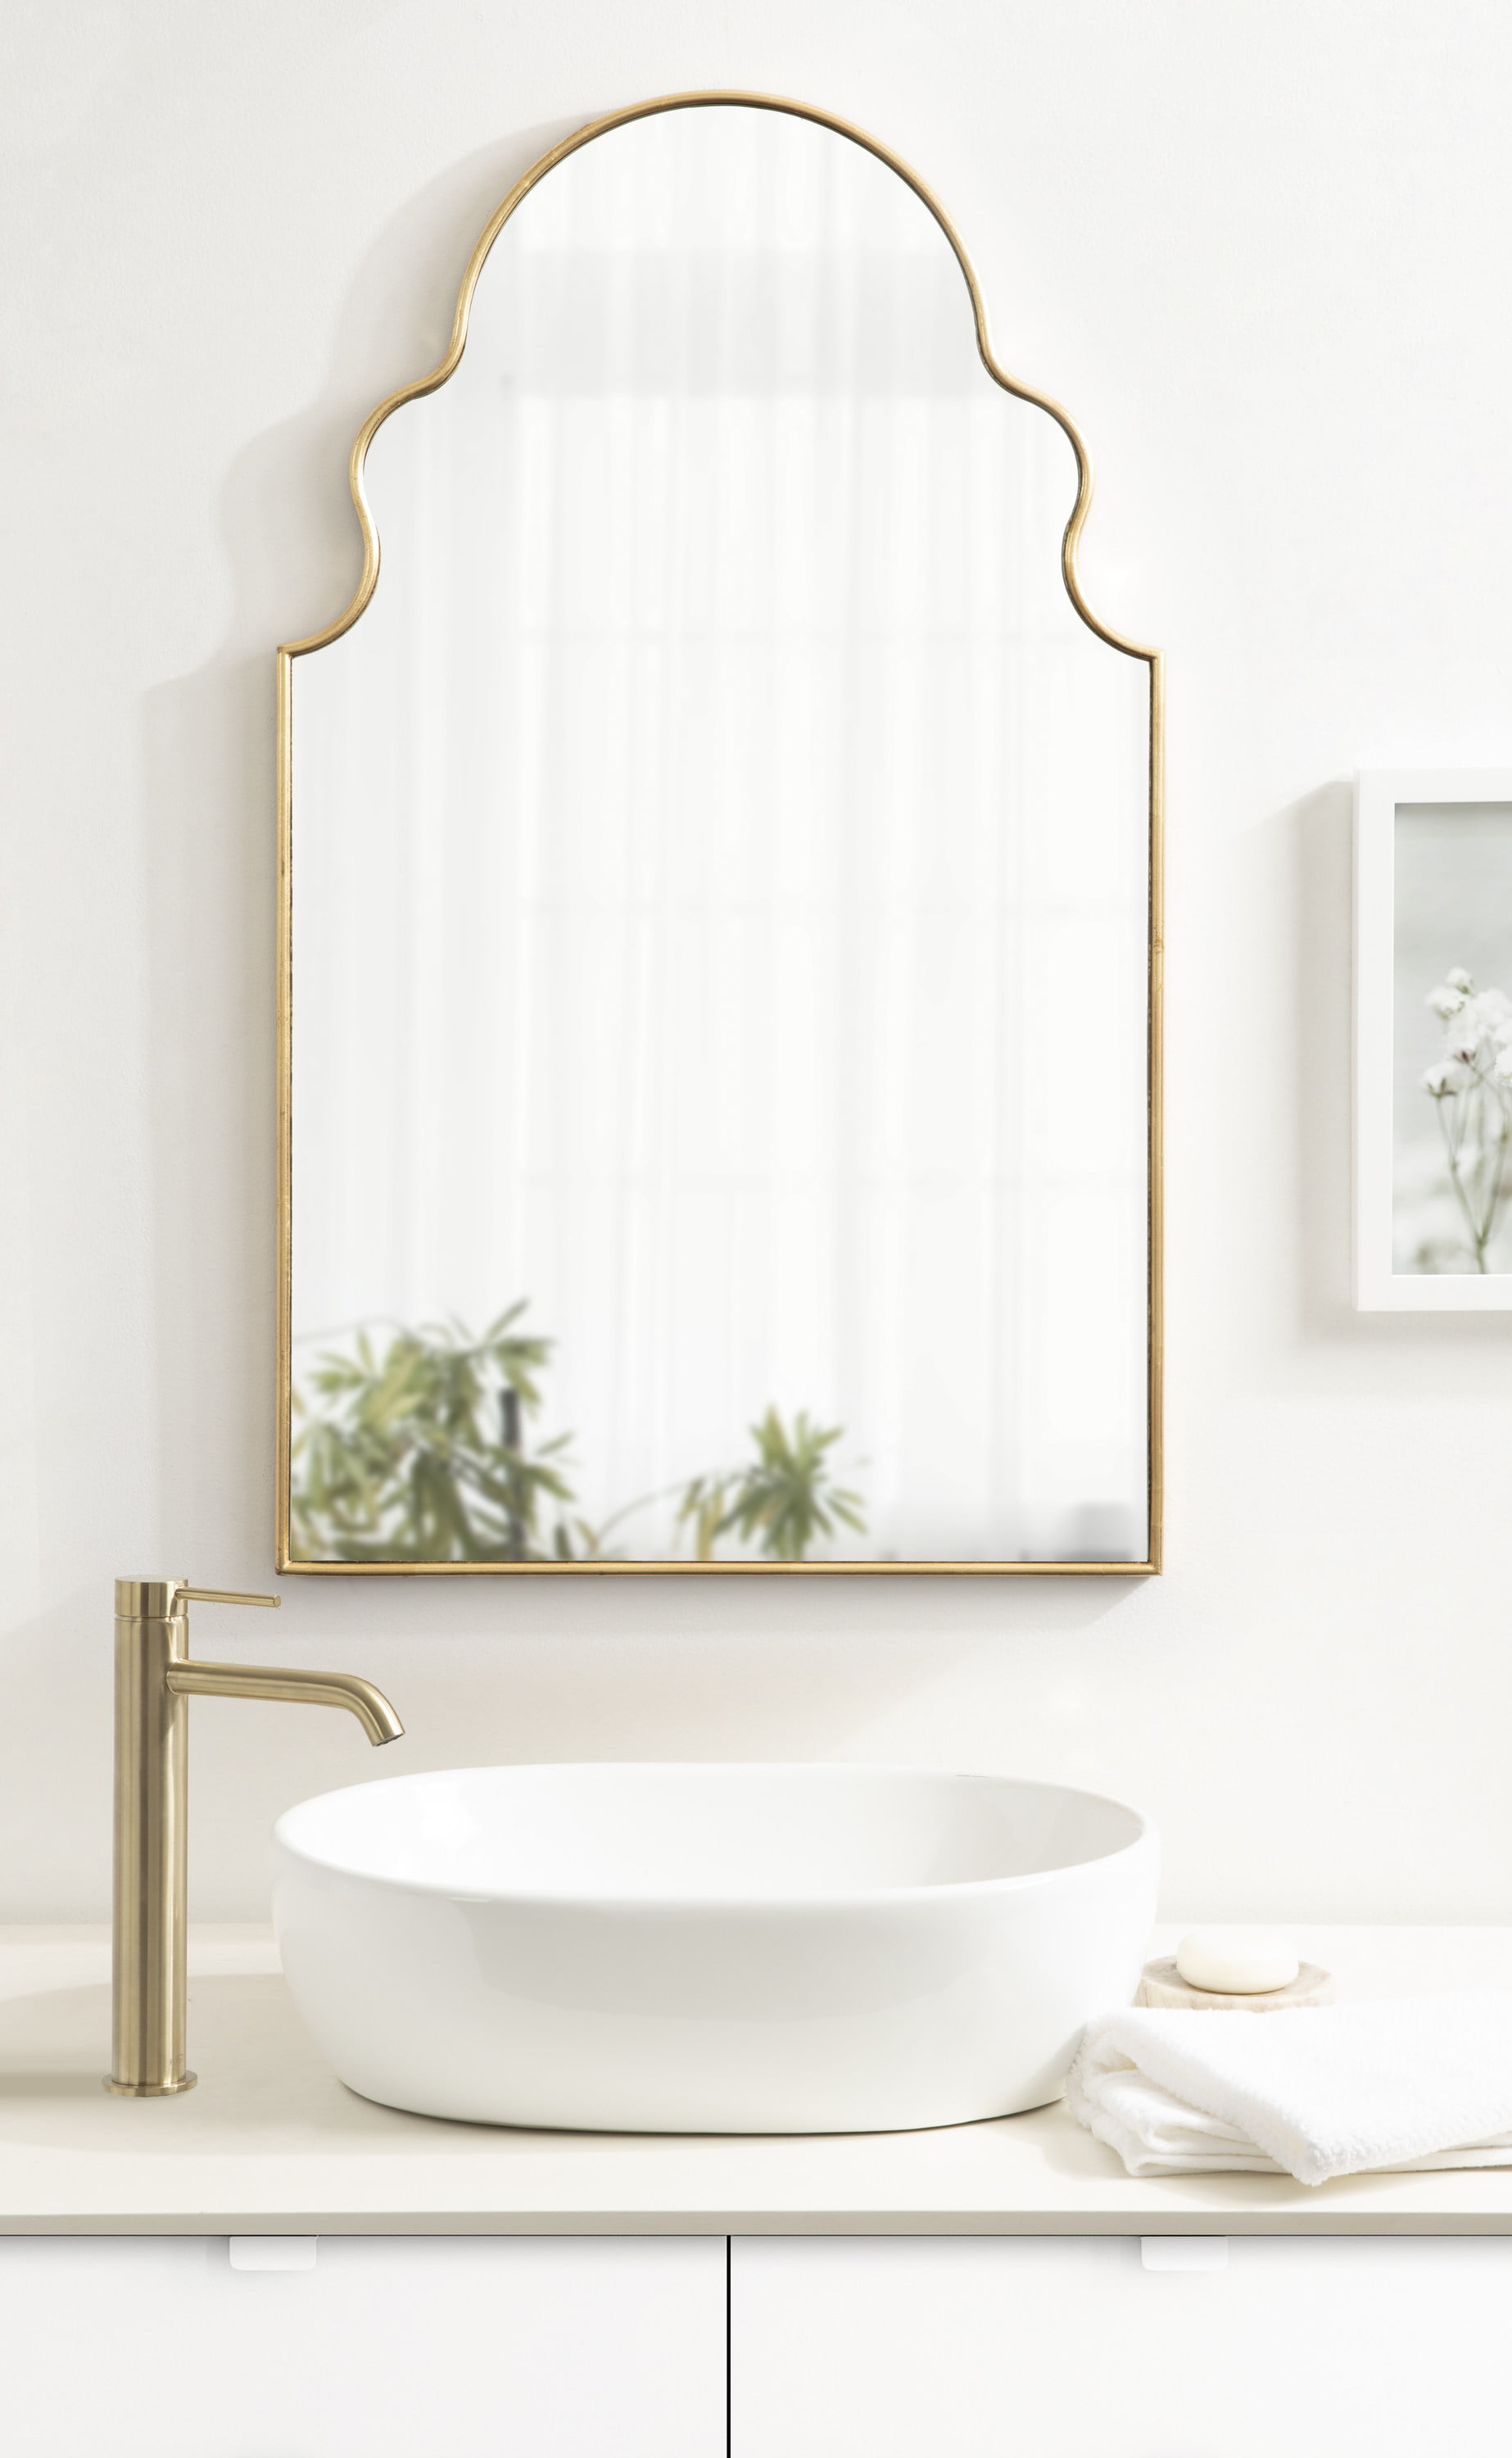 Kate and Laurel Chadwin Modern Arched Mirror with Marble Shelf, 20